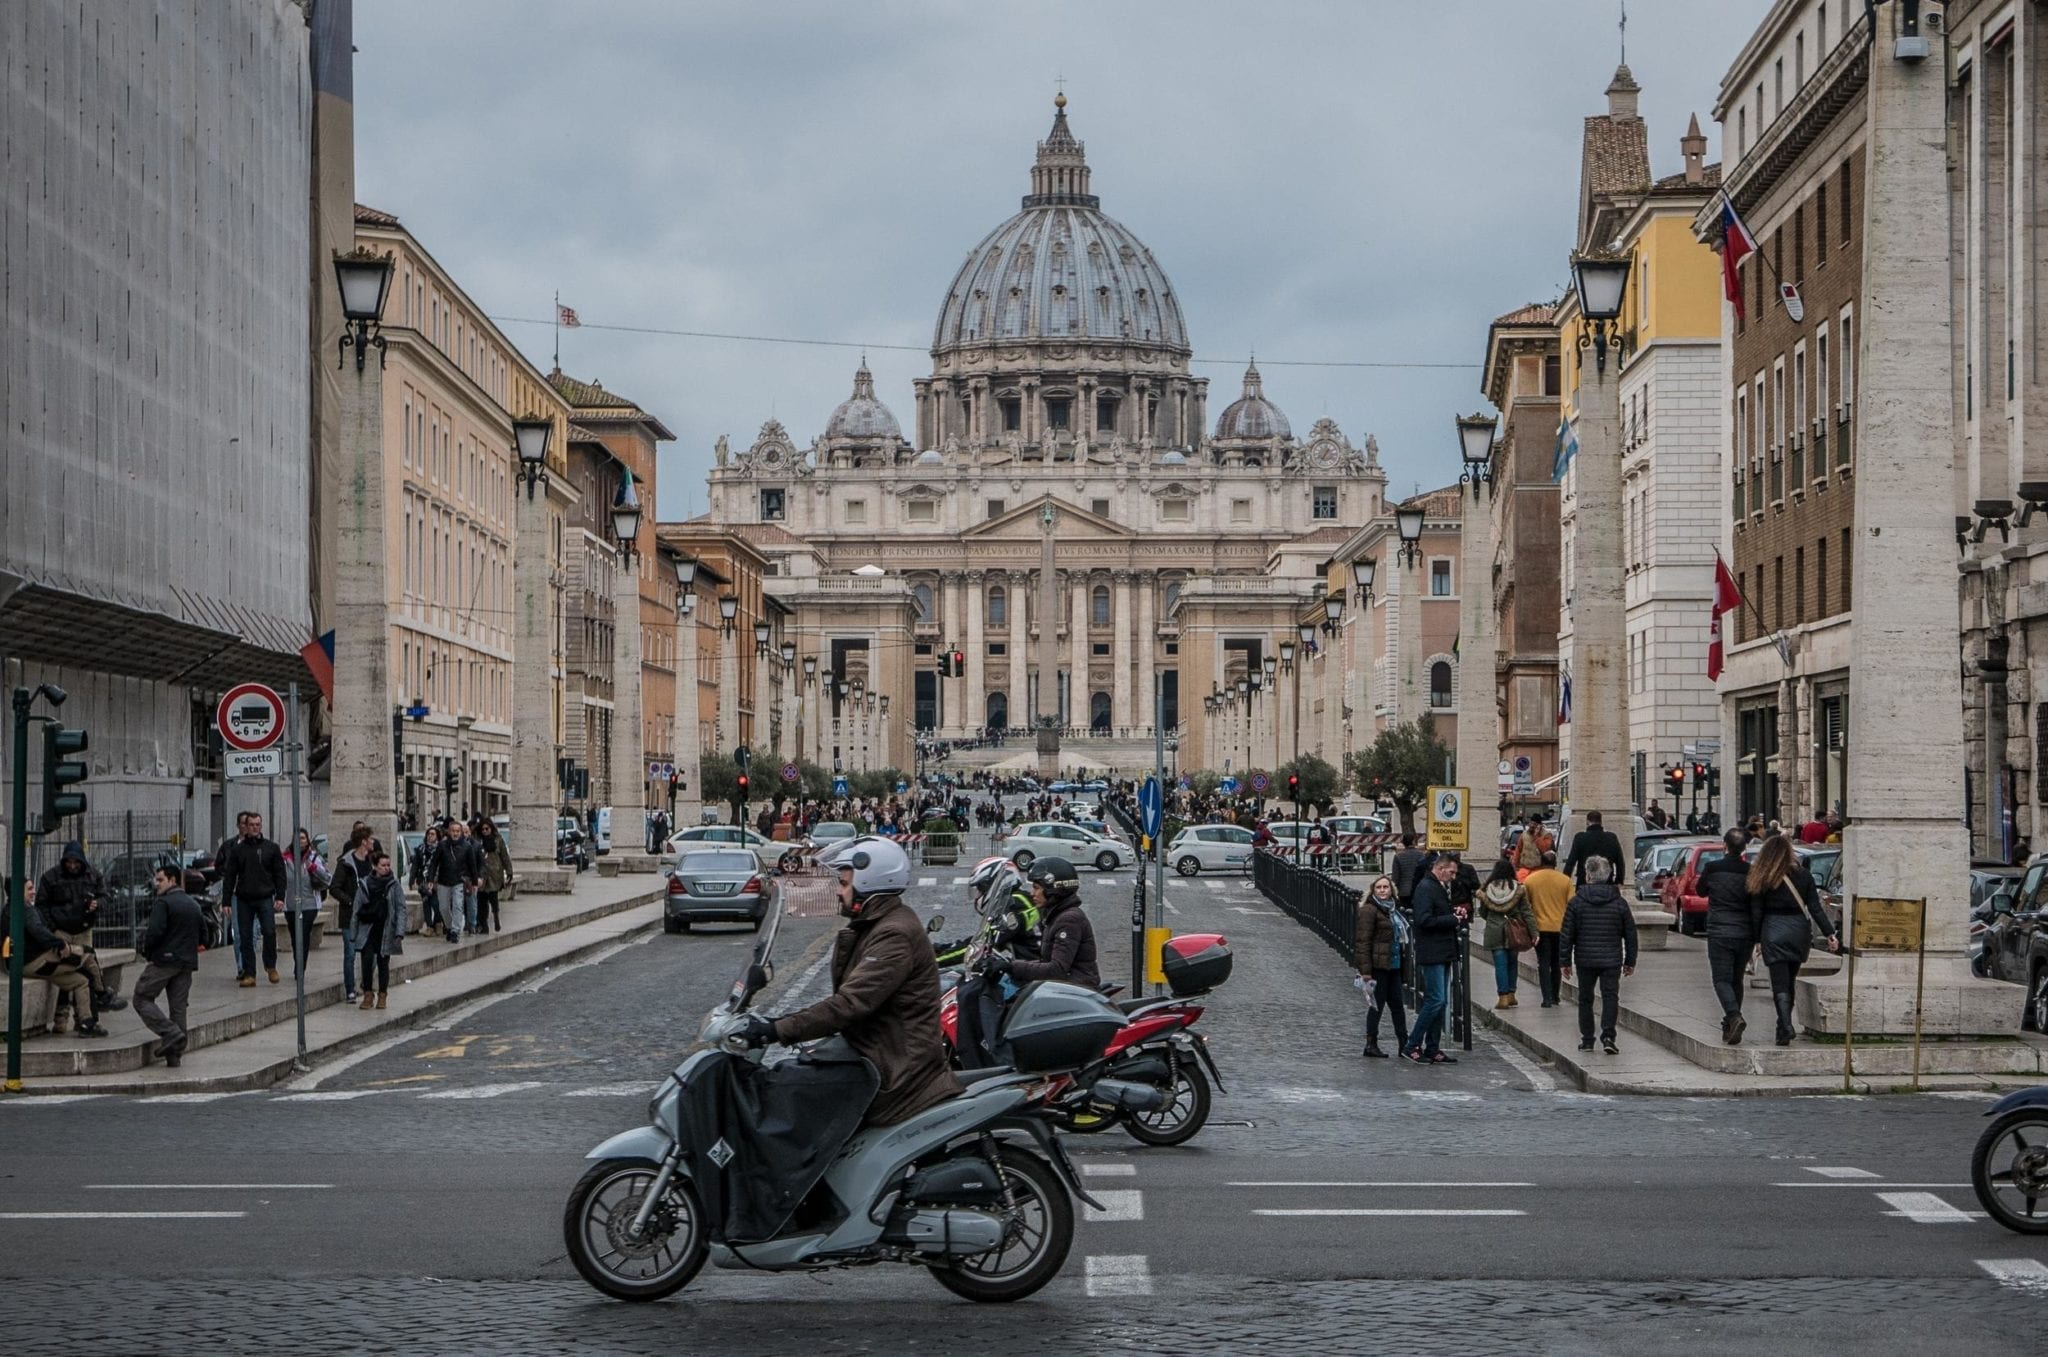 A street view of Rome with a man on a motorbike in front of the large dome of St. Peter's Basilica.